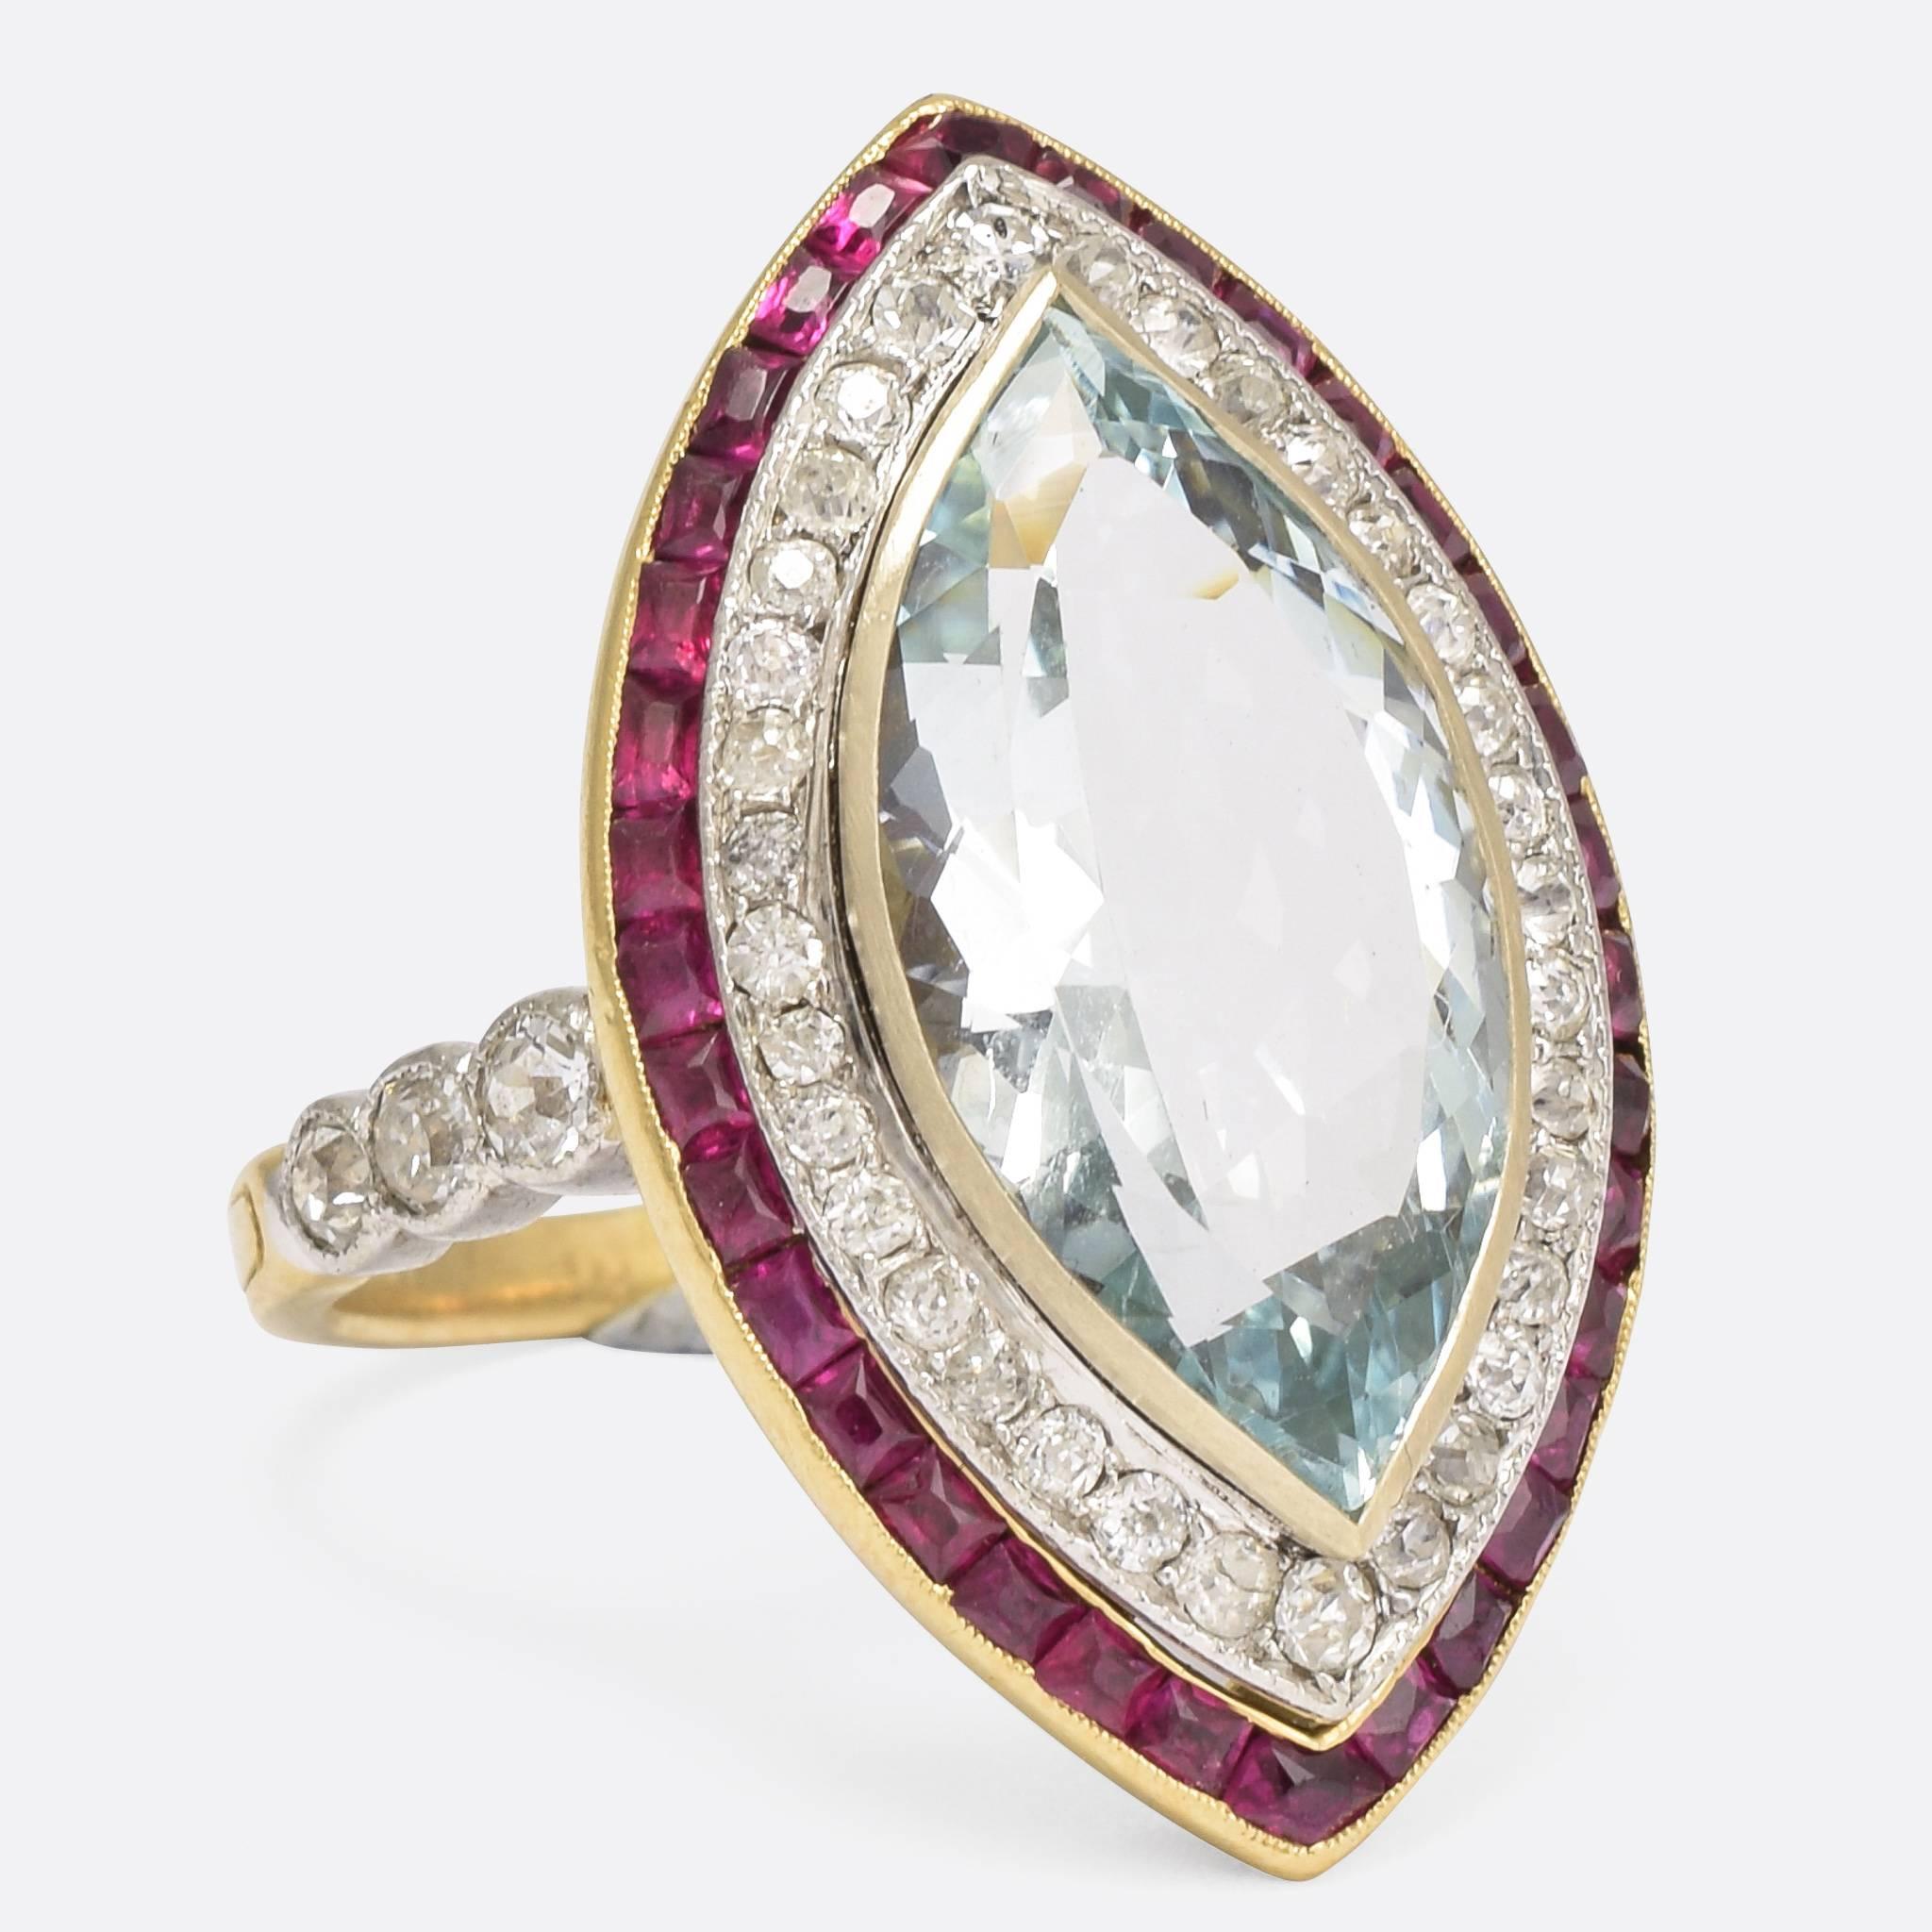 An astonishing Edwardian era marquise cluster ring, set with a central aquamarine framed by a double halo of diamonds and rubies. The quality is phenomenal, with wonderful pierced floral designs to the gallery, and three old cut diamond accents to